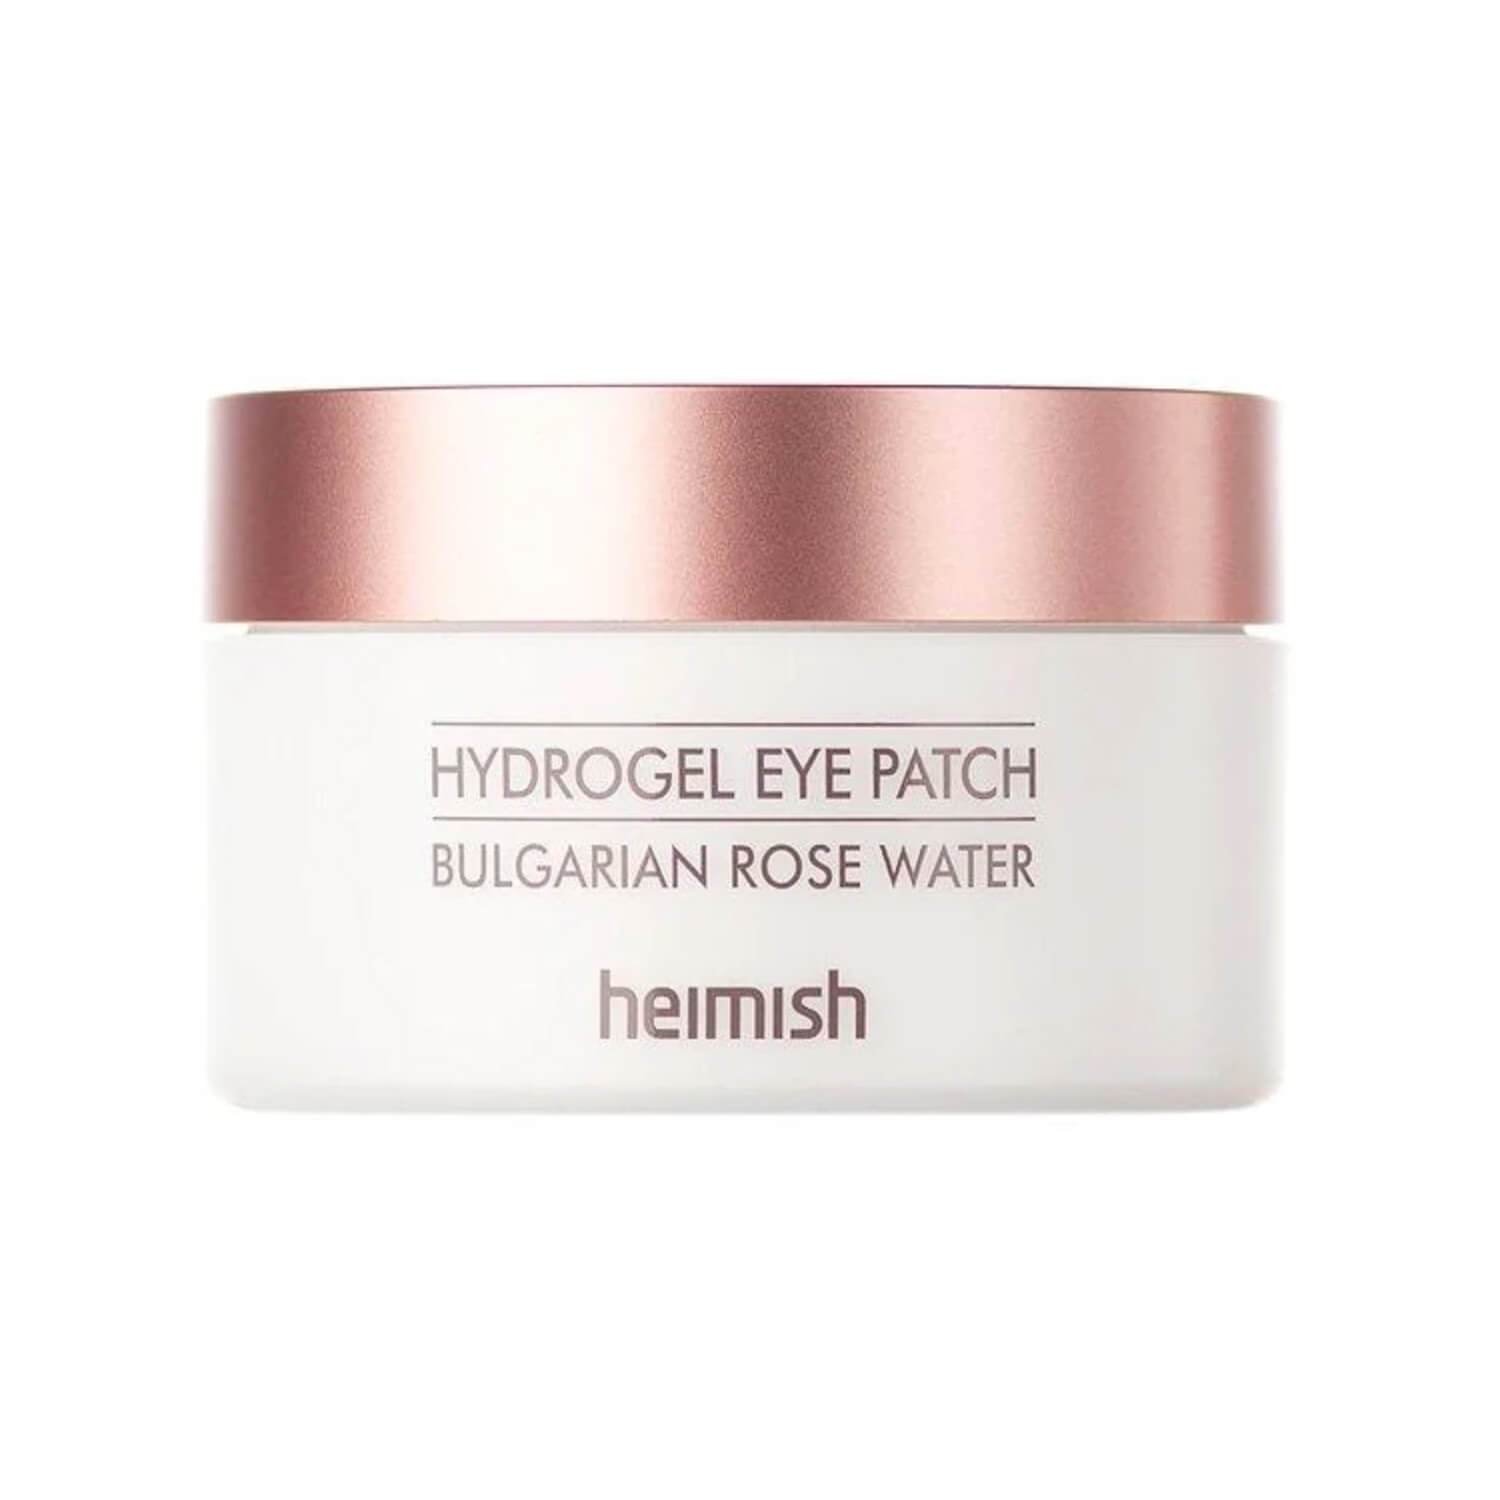 Heimish Bulgarian Rose Water Hydrogel Eye Patch 60 patches